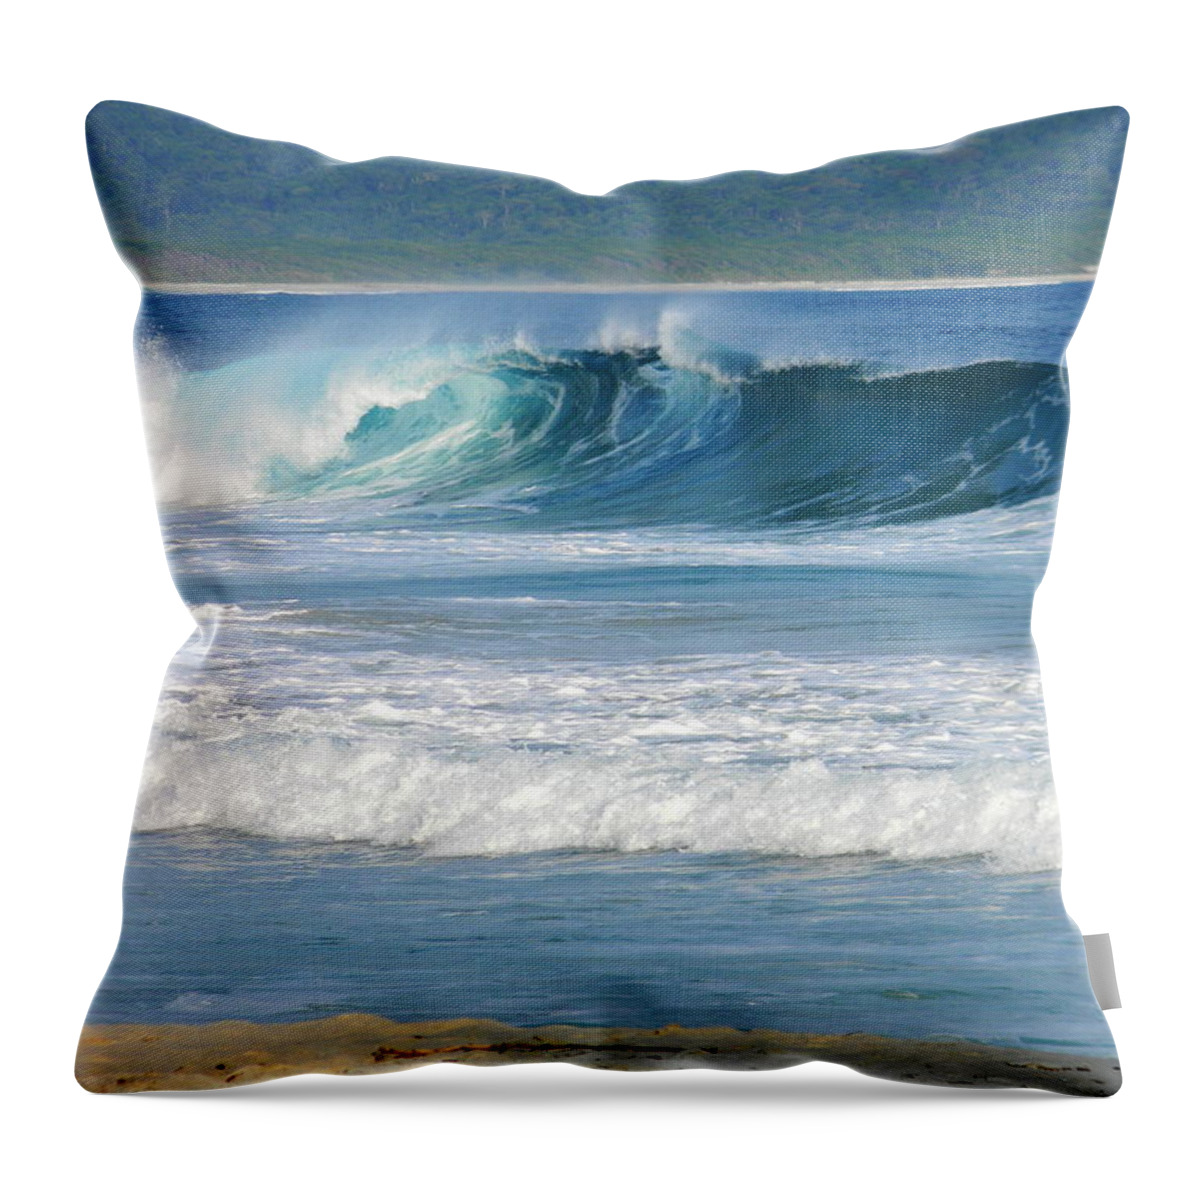 Outdoors Throw Pillow featuring the photograph Watching The Waves by Natilady C.